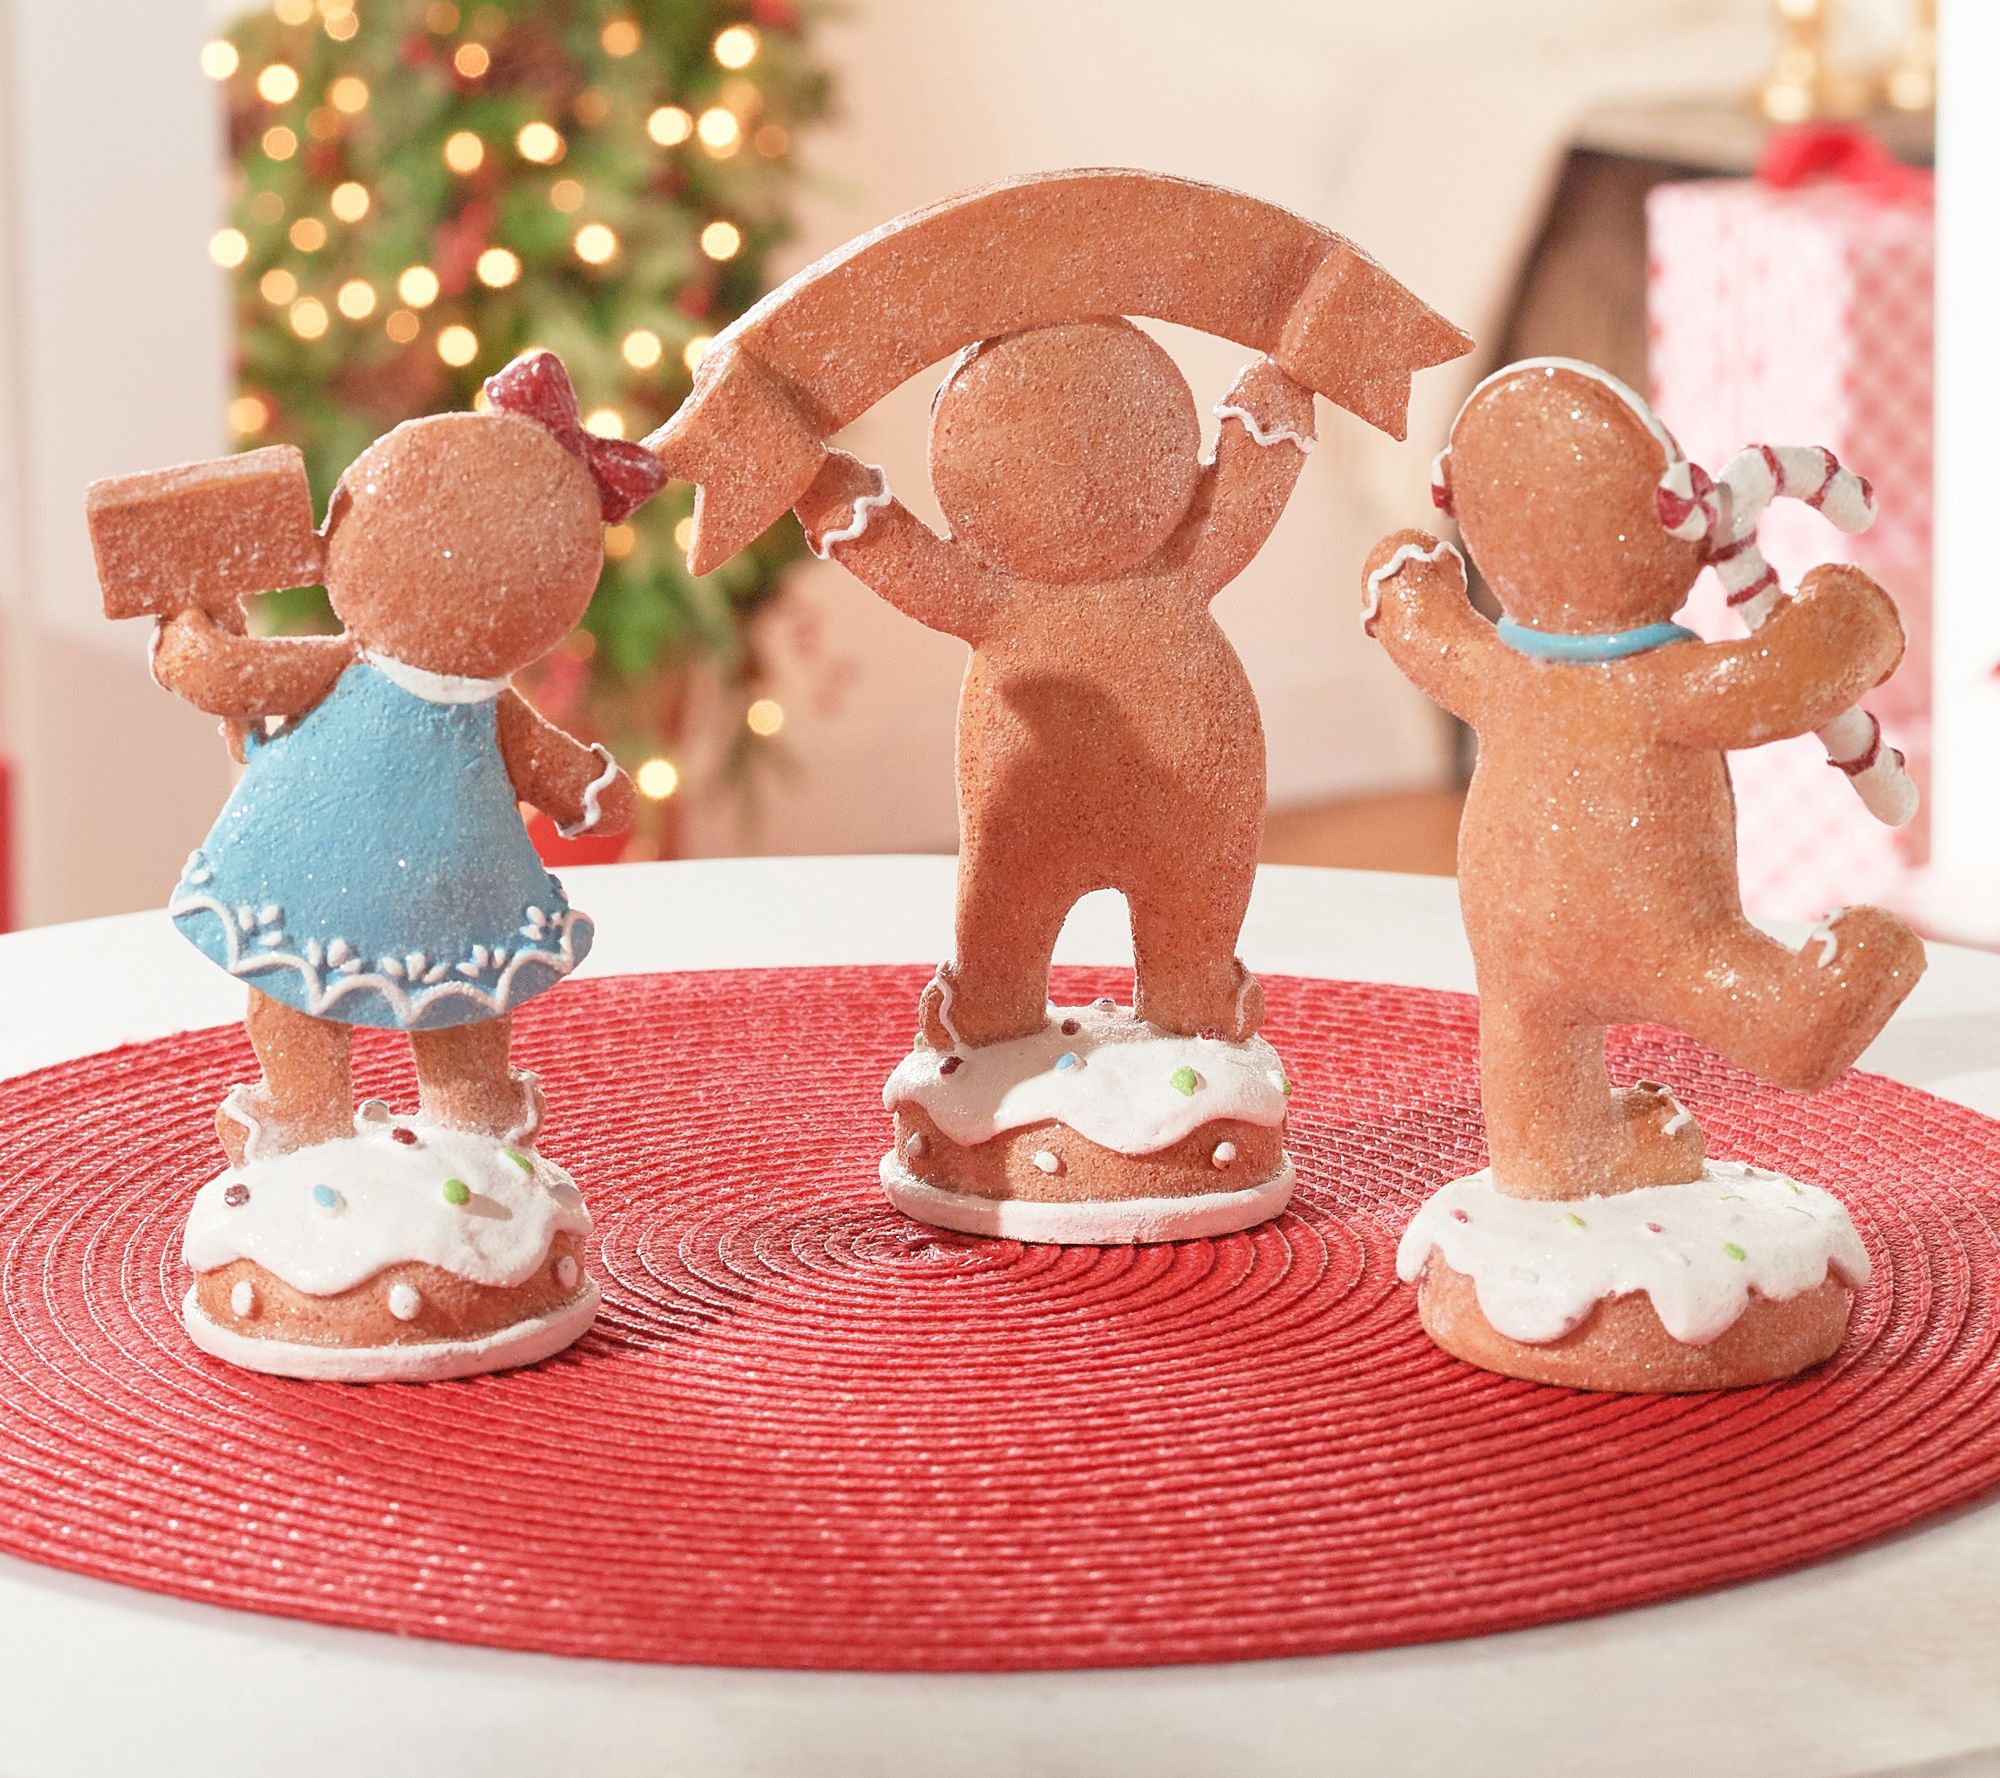 set-of-3-gingerbread-friends-with-messages-by-valerie-qvc